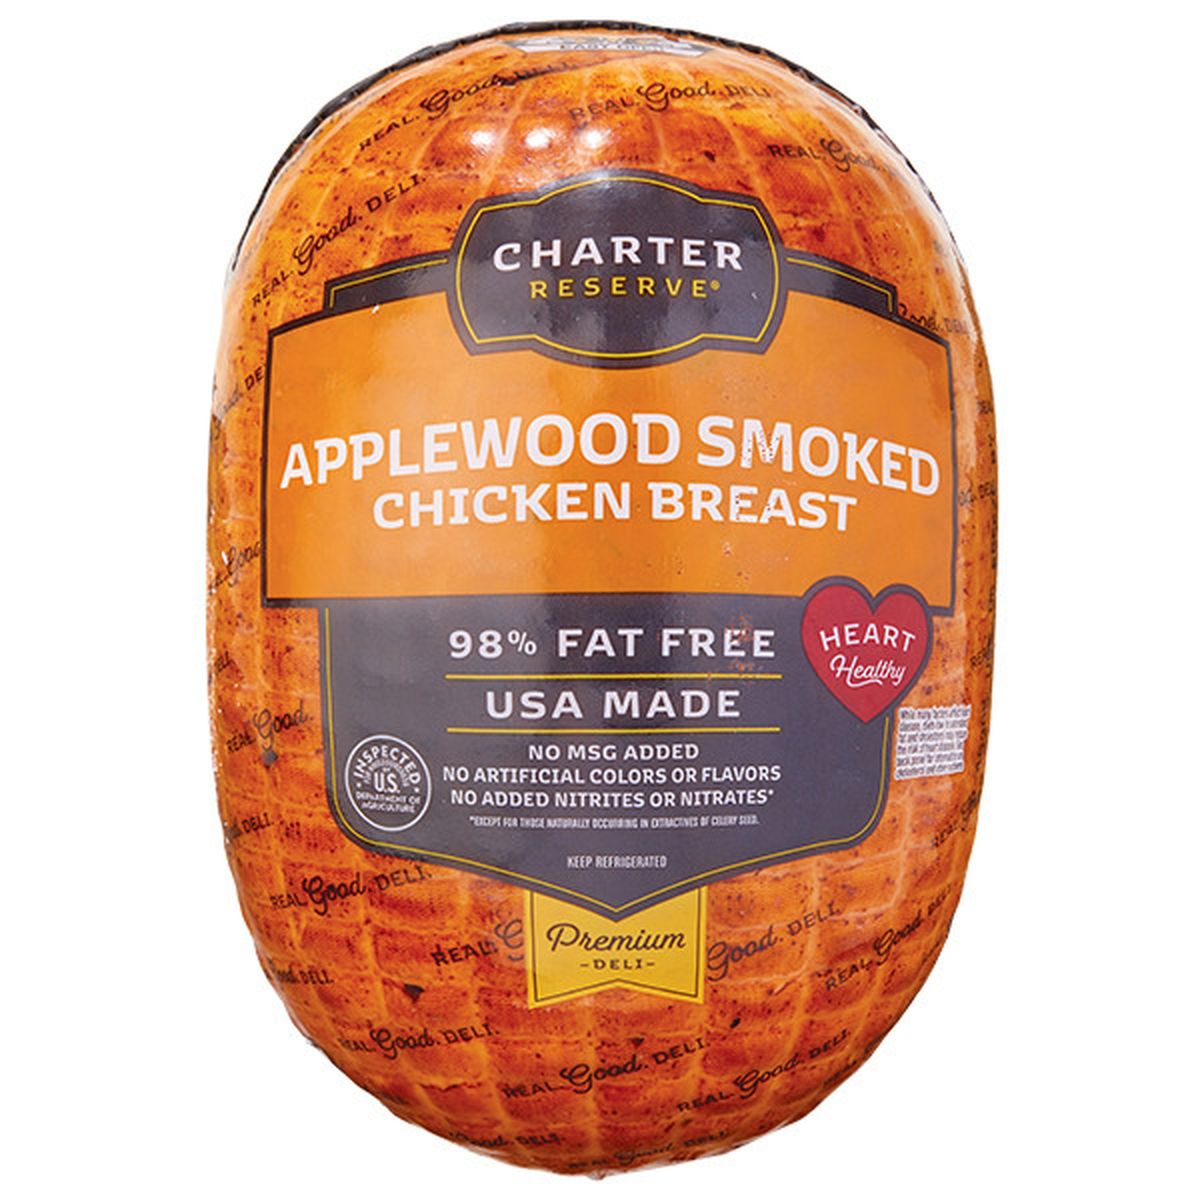 Calories in Charter Reserve Applewood Smoked Chicken Breast